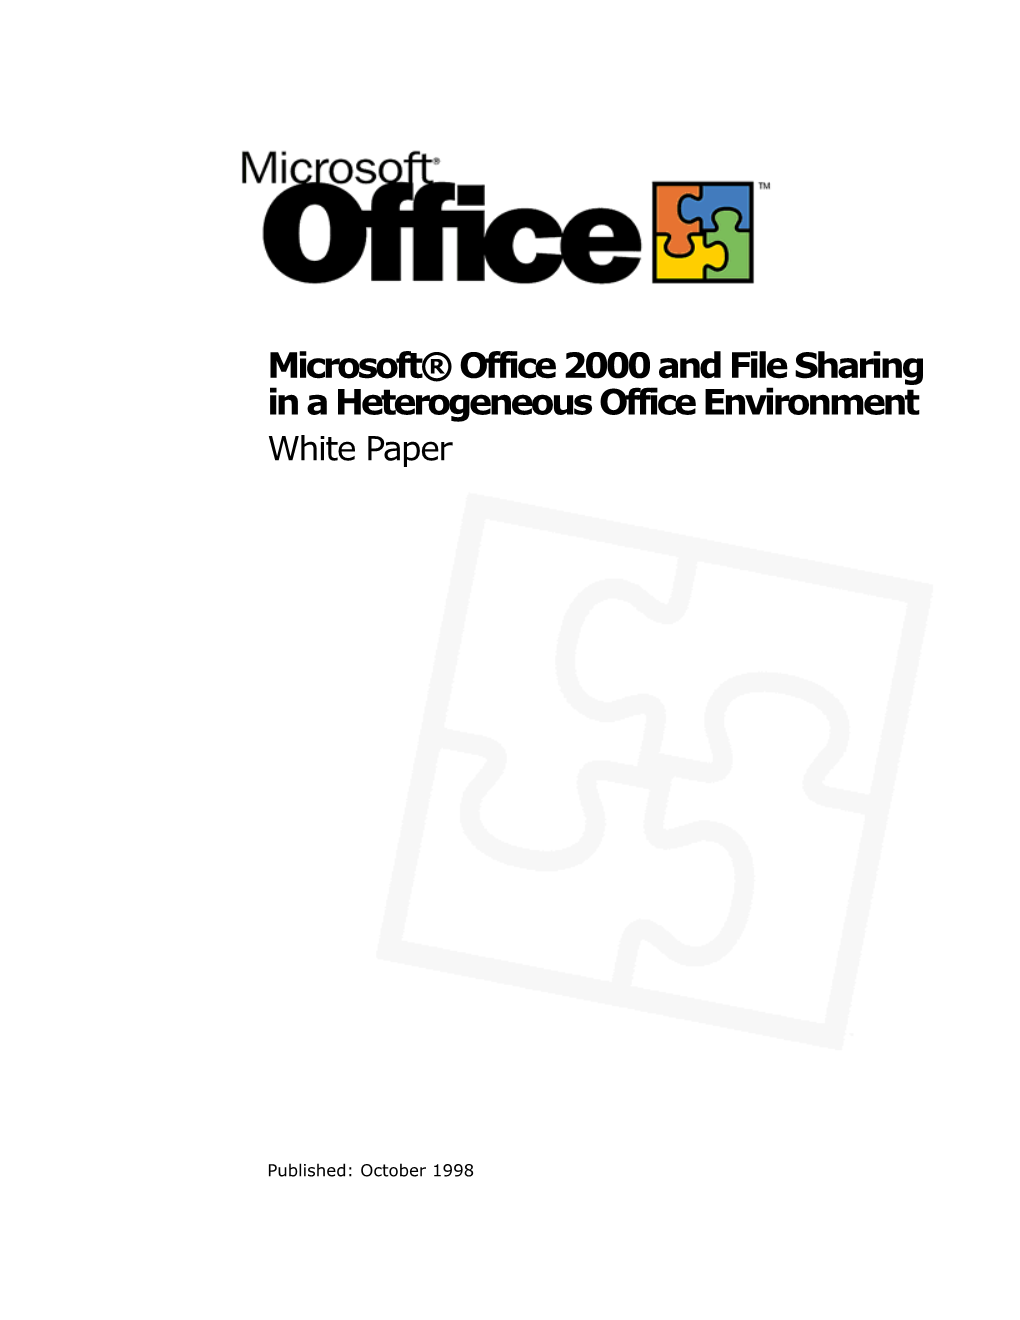 Microsoft Office 2000 and File Sharing in a Heterogeneous Office Environment